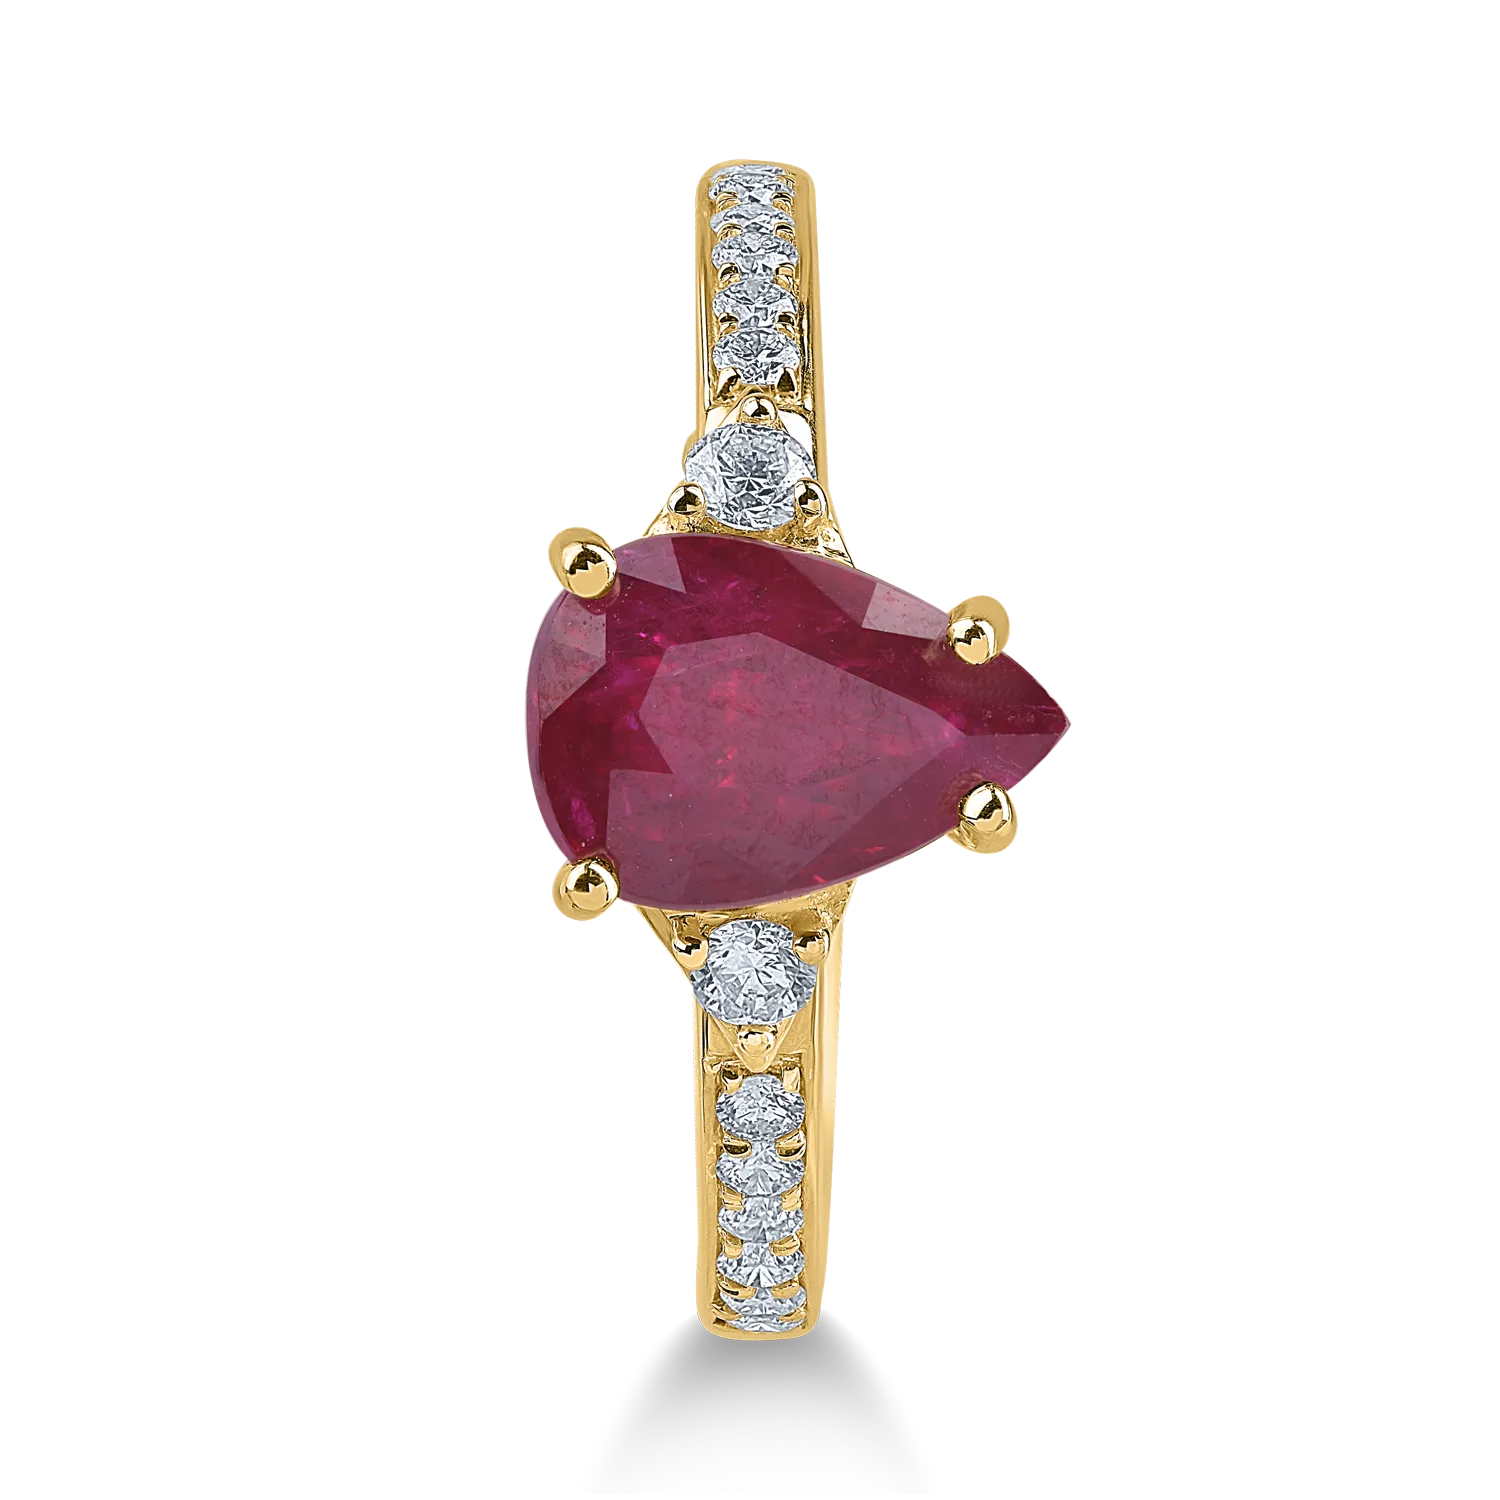 Yellow gold ring with 1.77ct ruby and 0.24ct diamonds